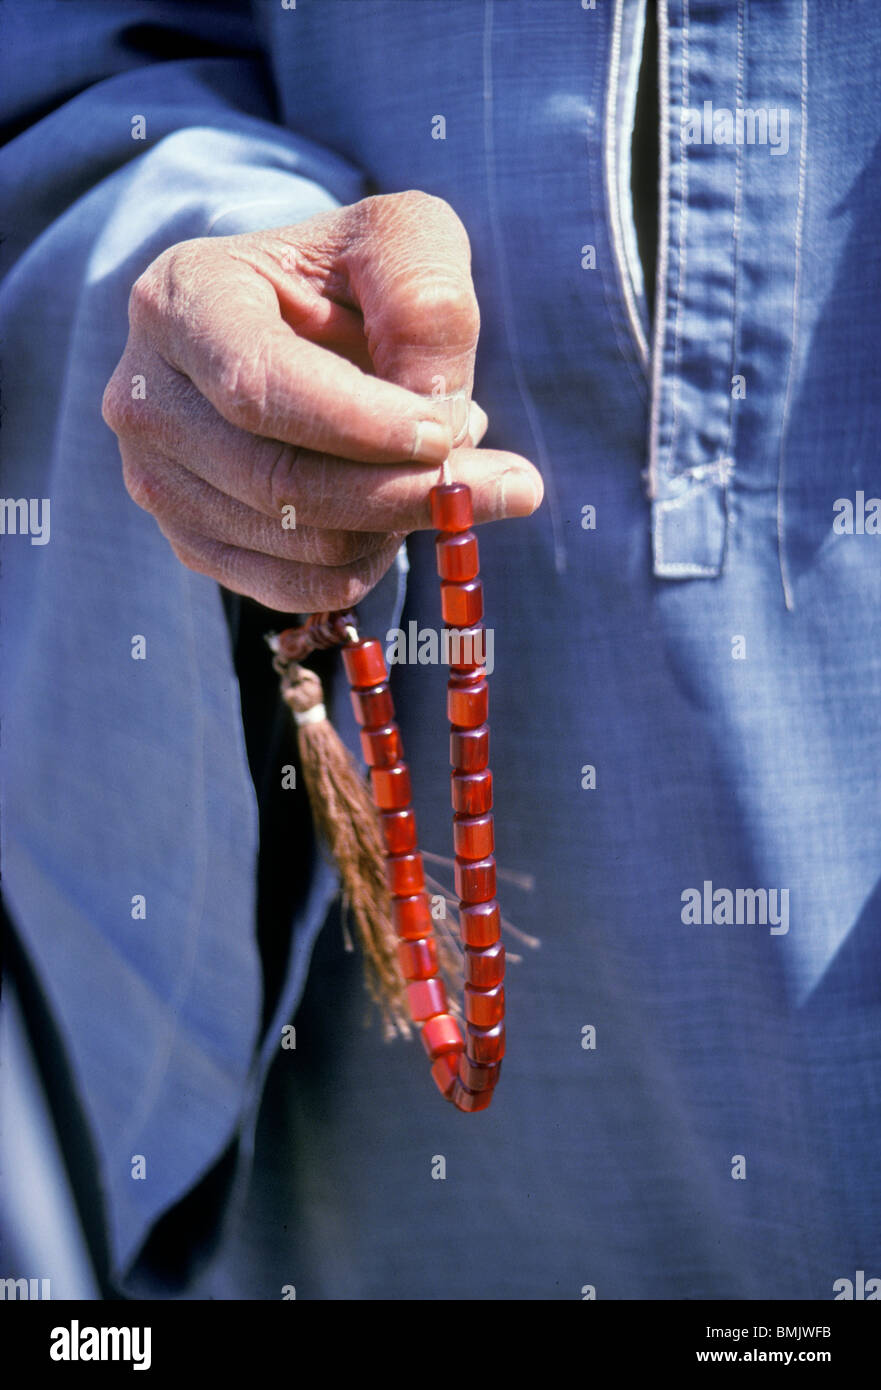 In Aswan, Egypt, a close-up of a man's hand holding a string of red prayer beads and wearing a blue galabeya. Stock Photo